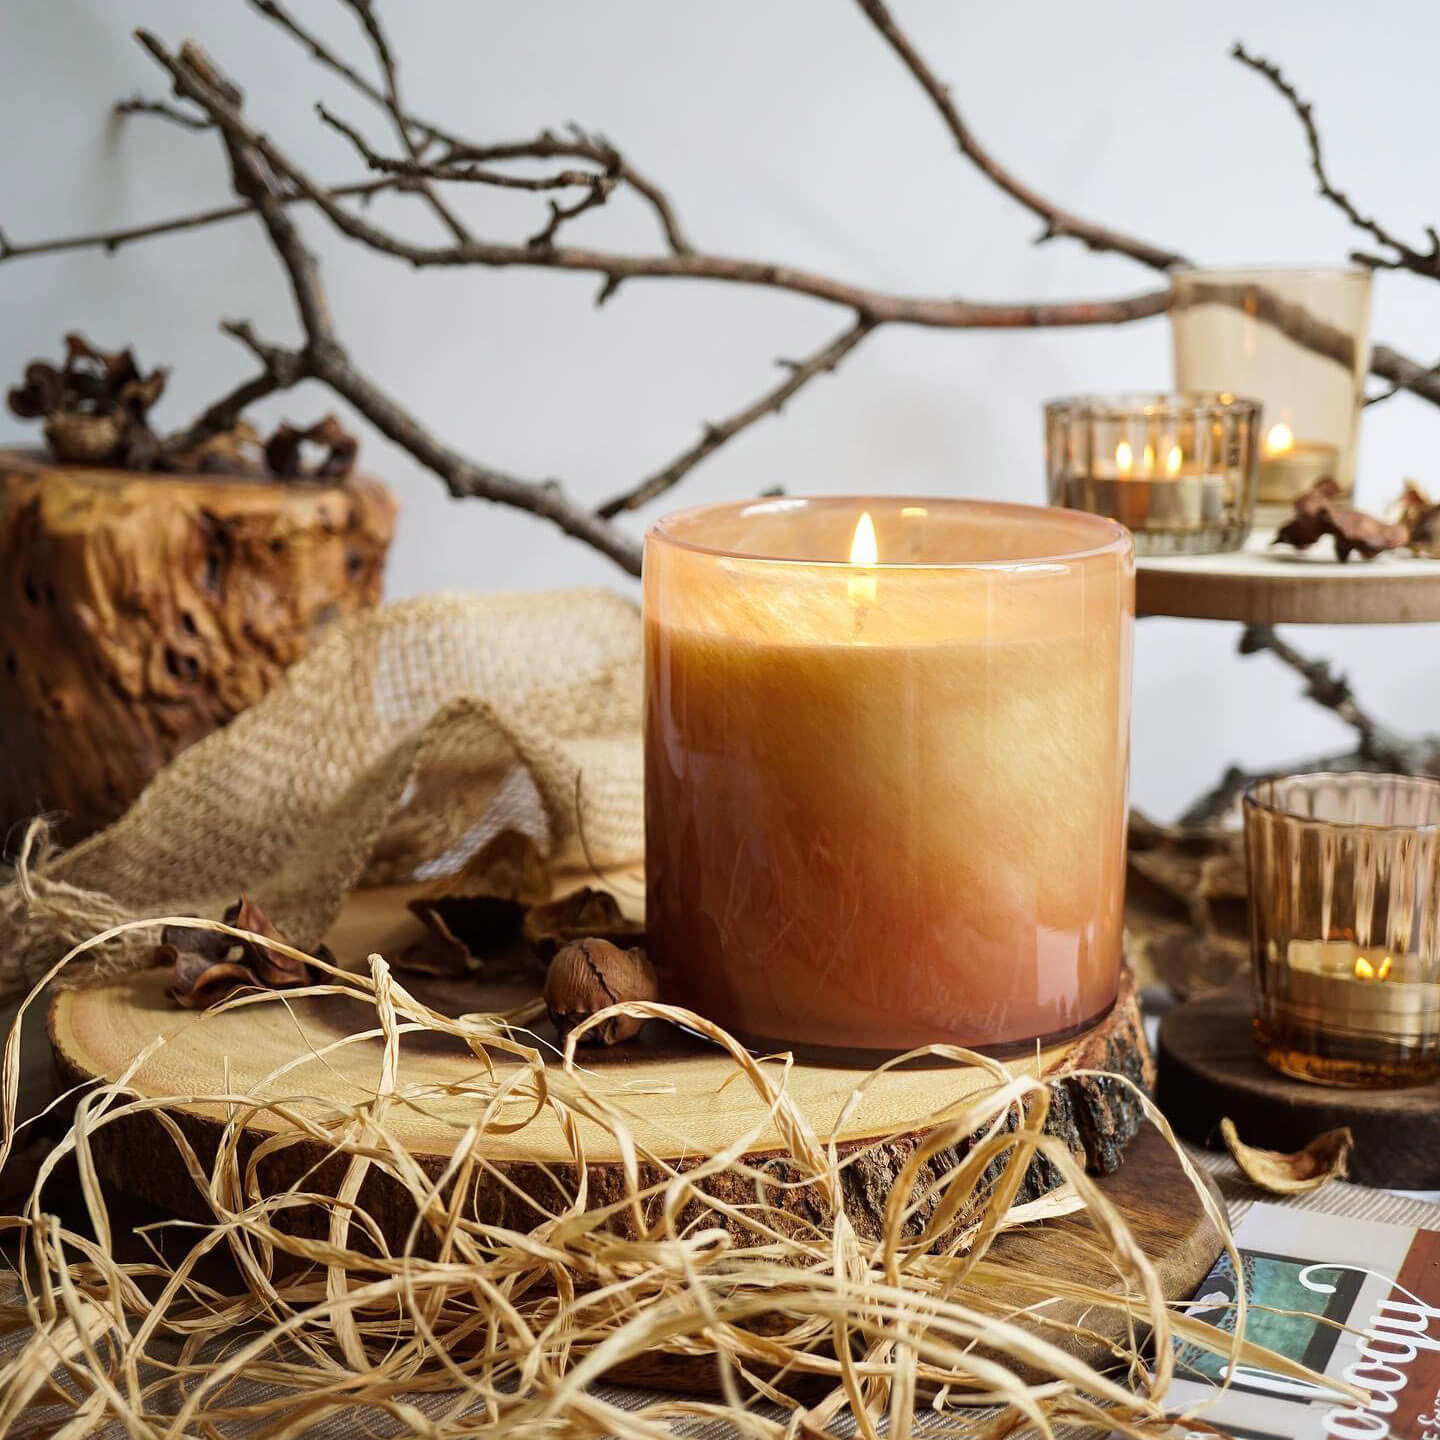 Retreat Candle by LAFCO